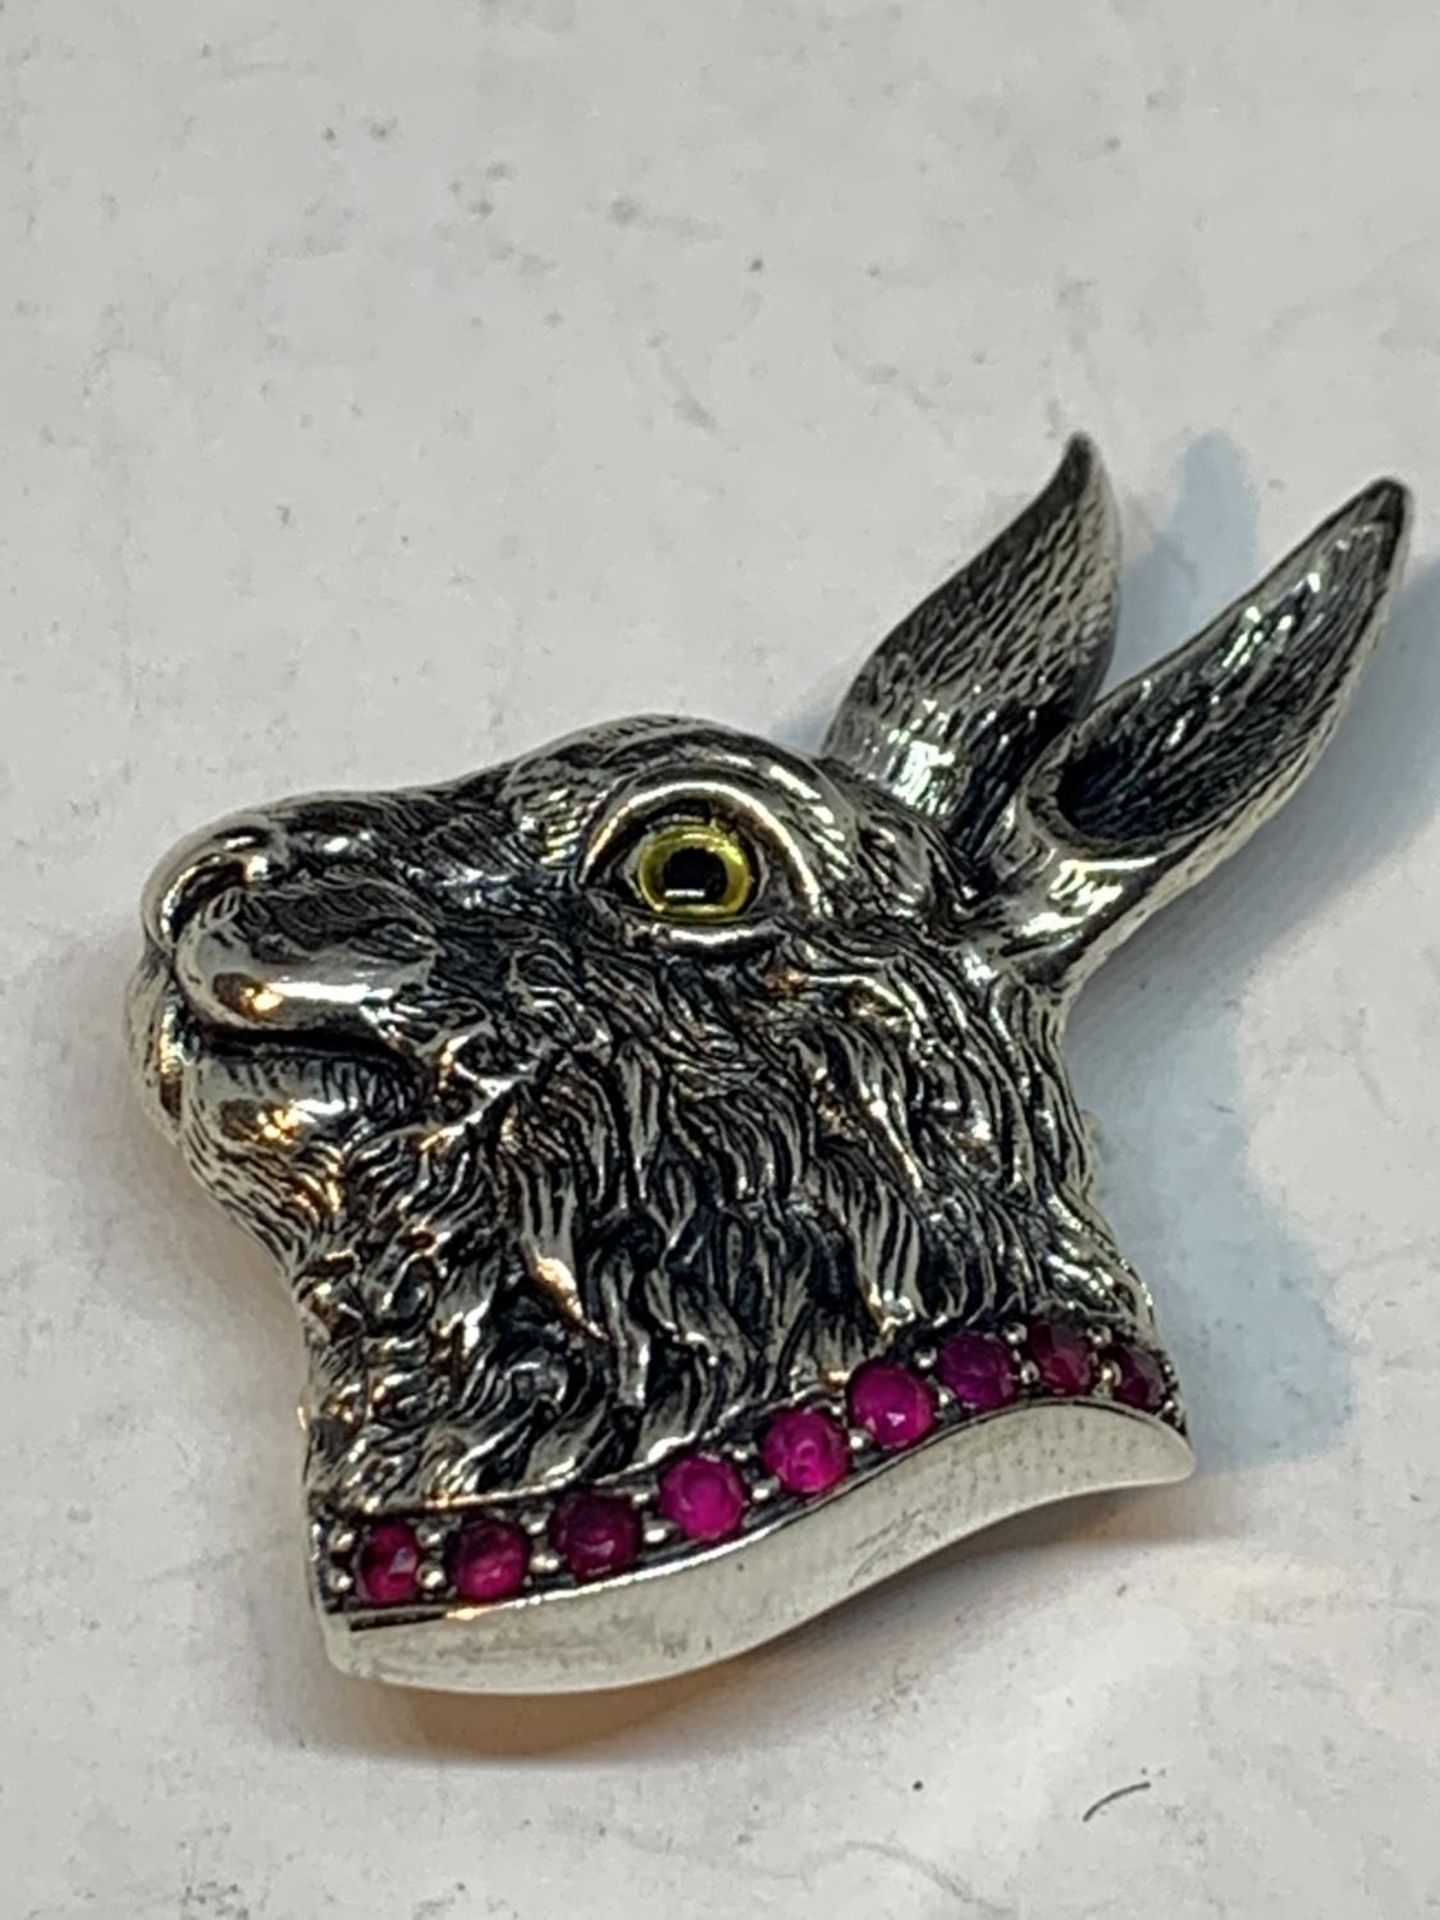 A MARKED SILVER HARE DESIGN PENDANT/BROOCH WITH A GREEN STONE COLLAR - Image 2 of 4